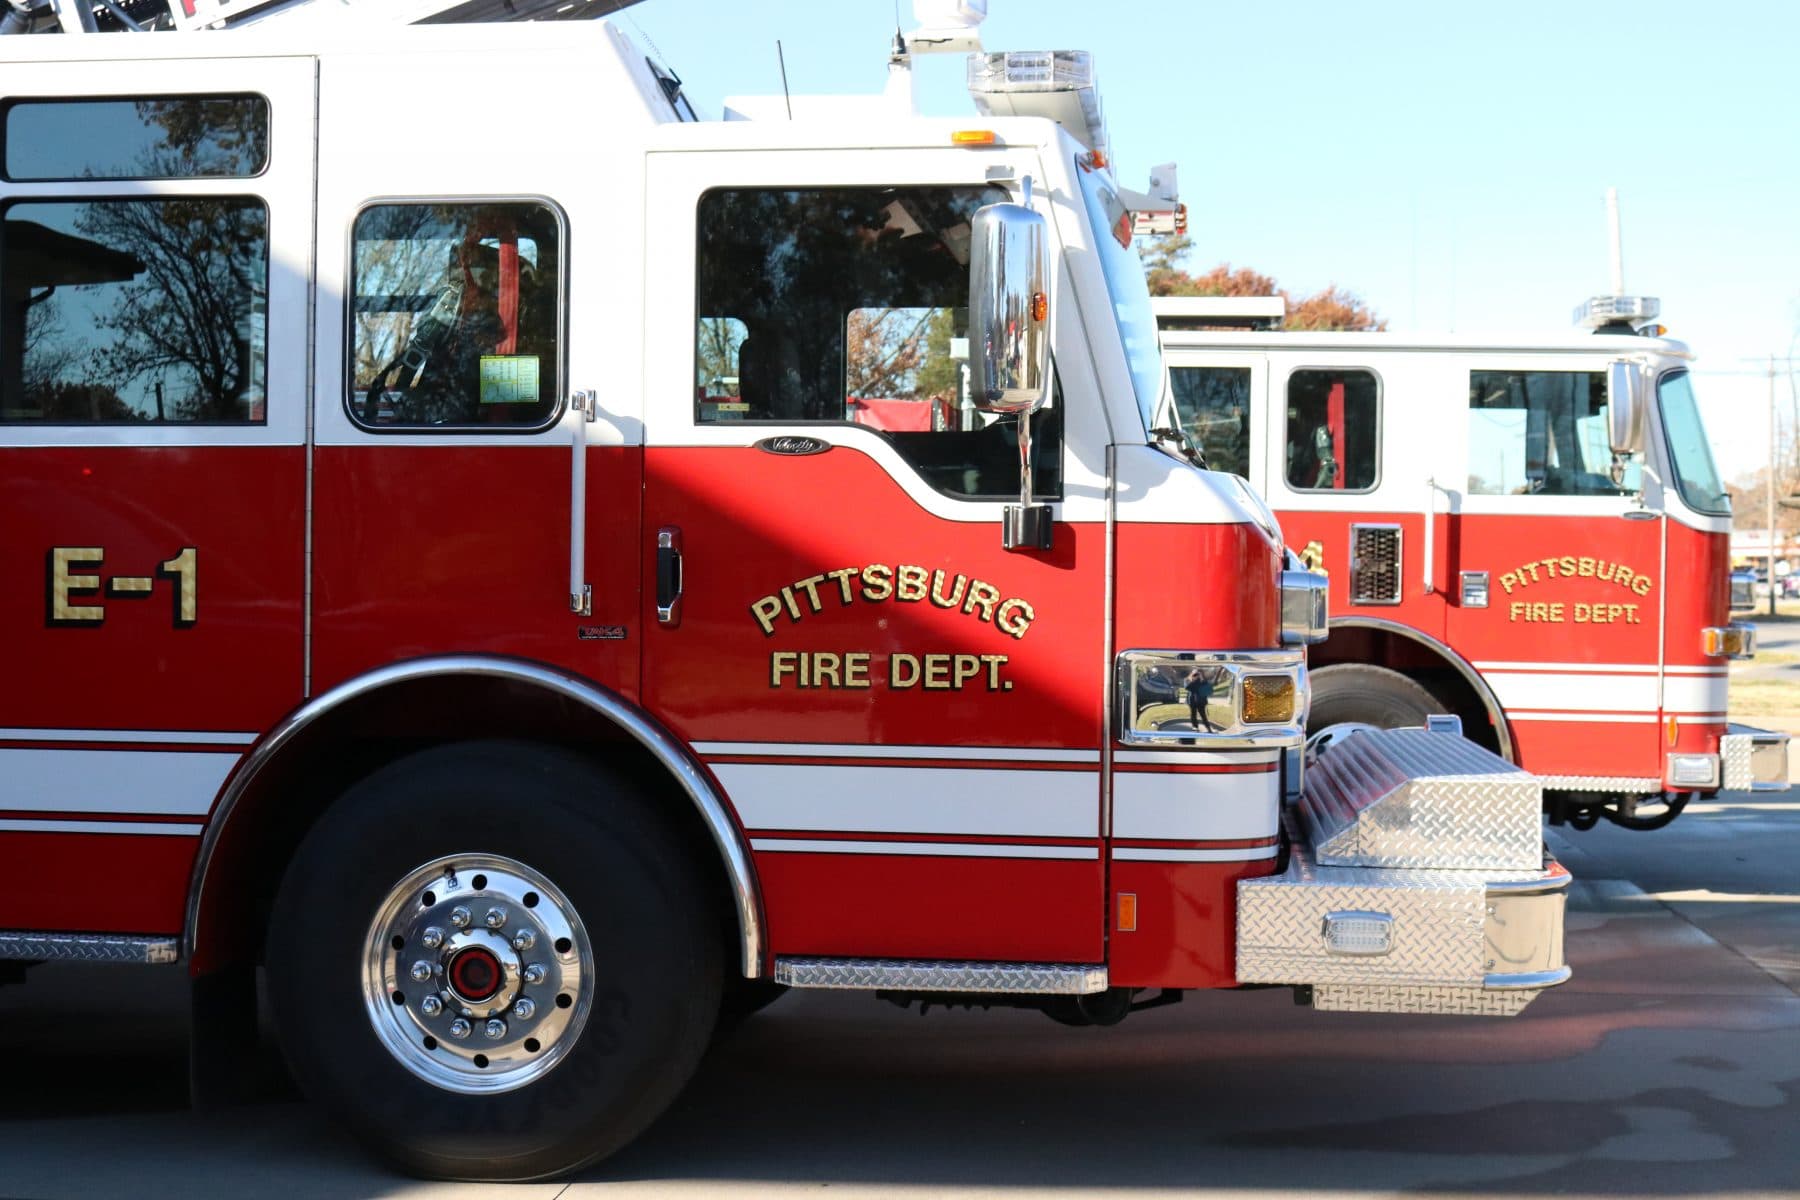 City of Pittsburg appoints new fire chief